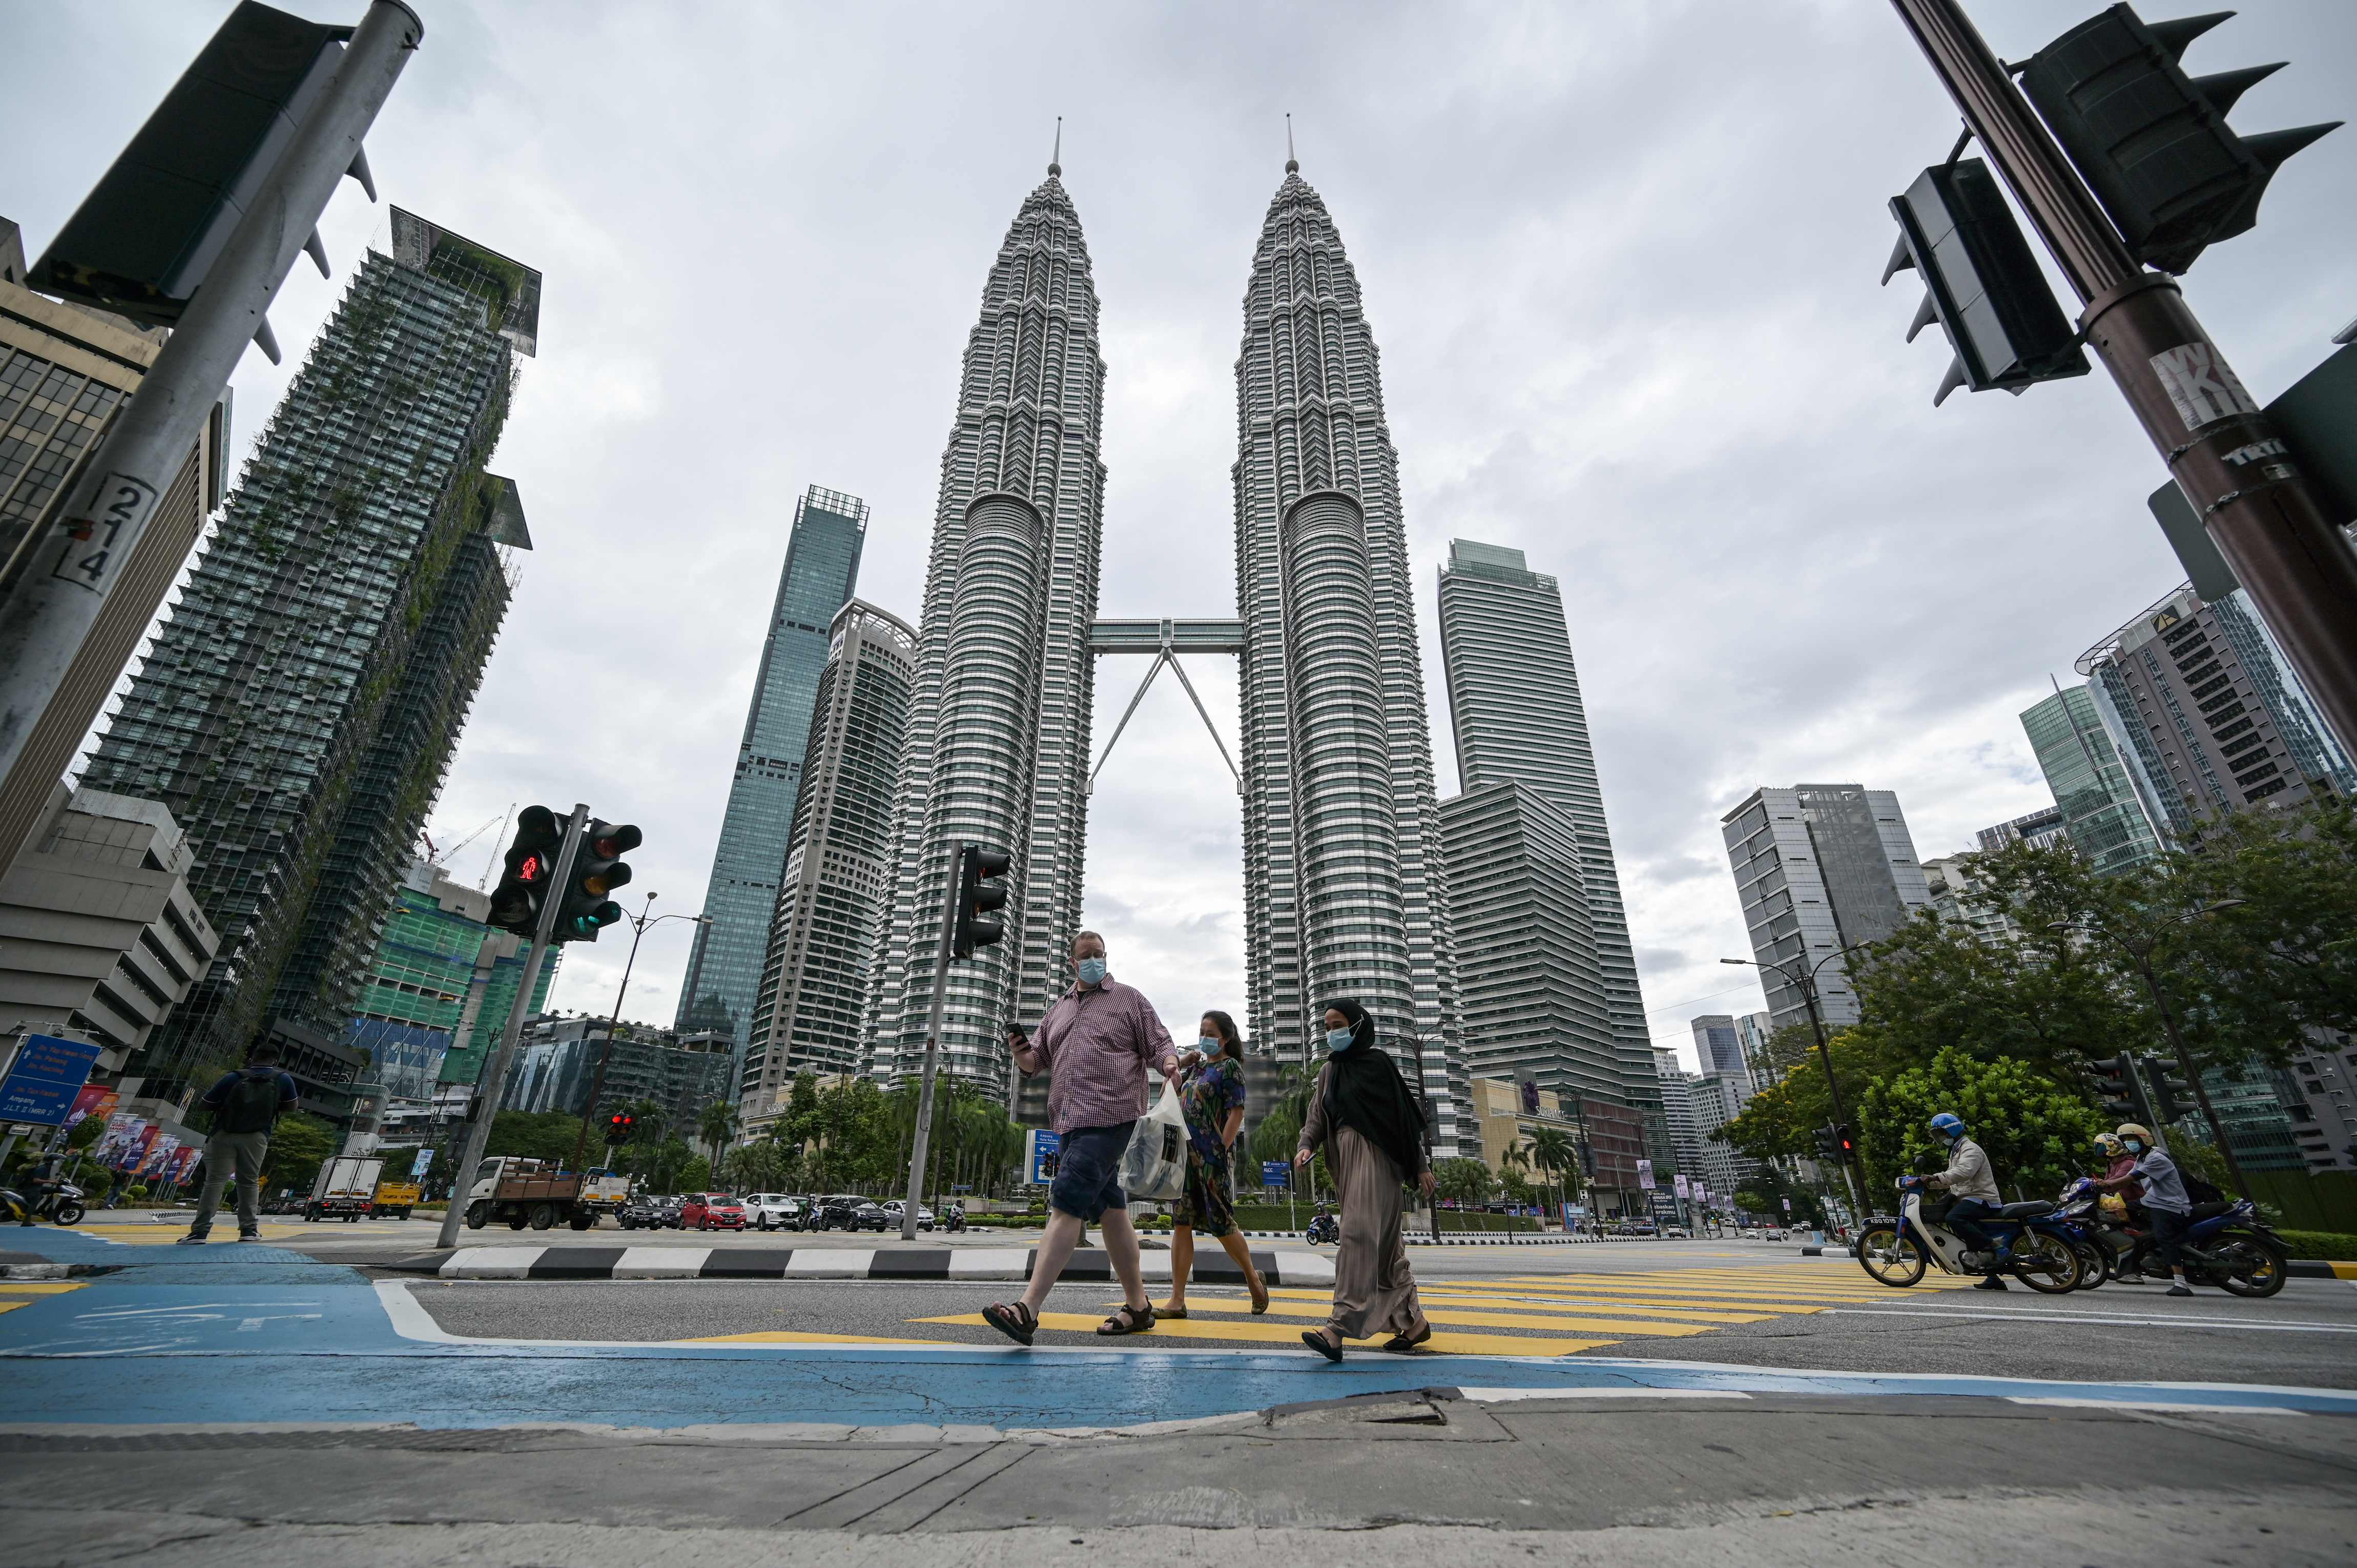 Representative image: Malaysia is considered among the world’s most conservative countries